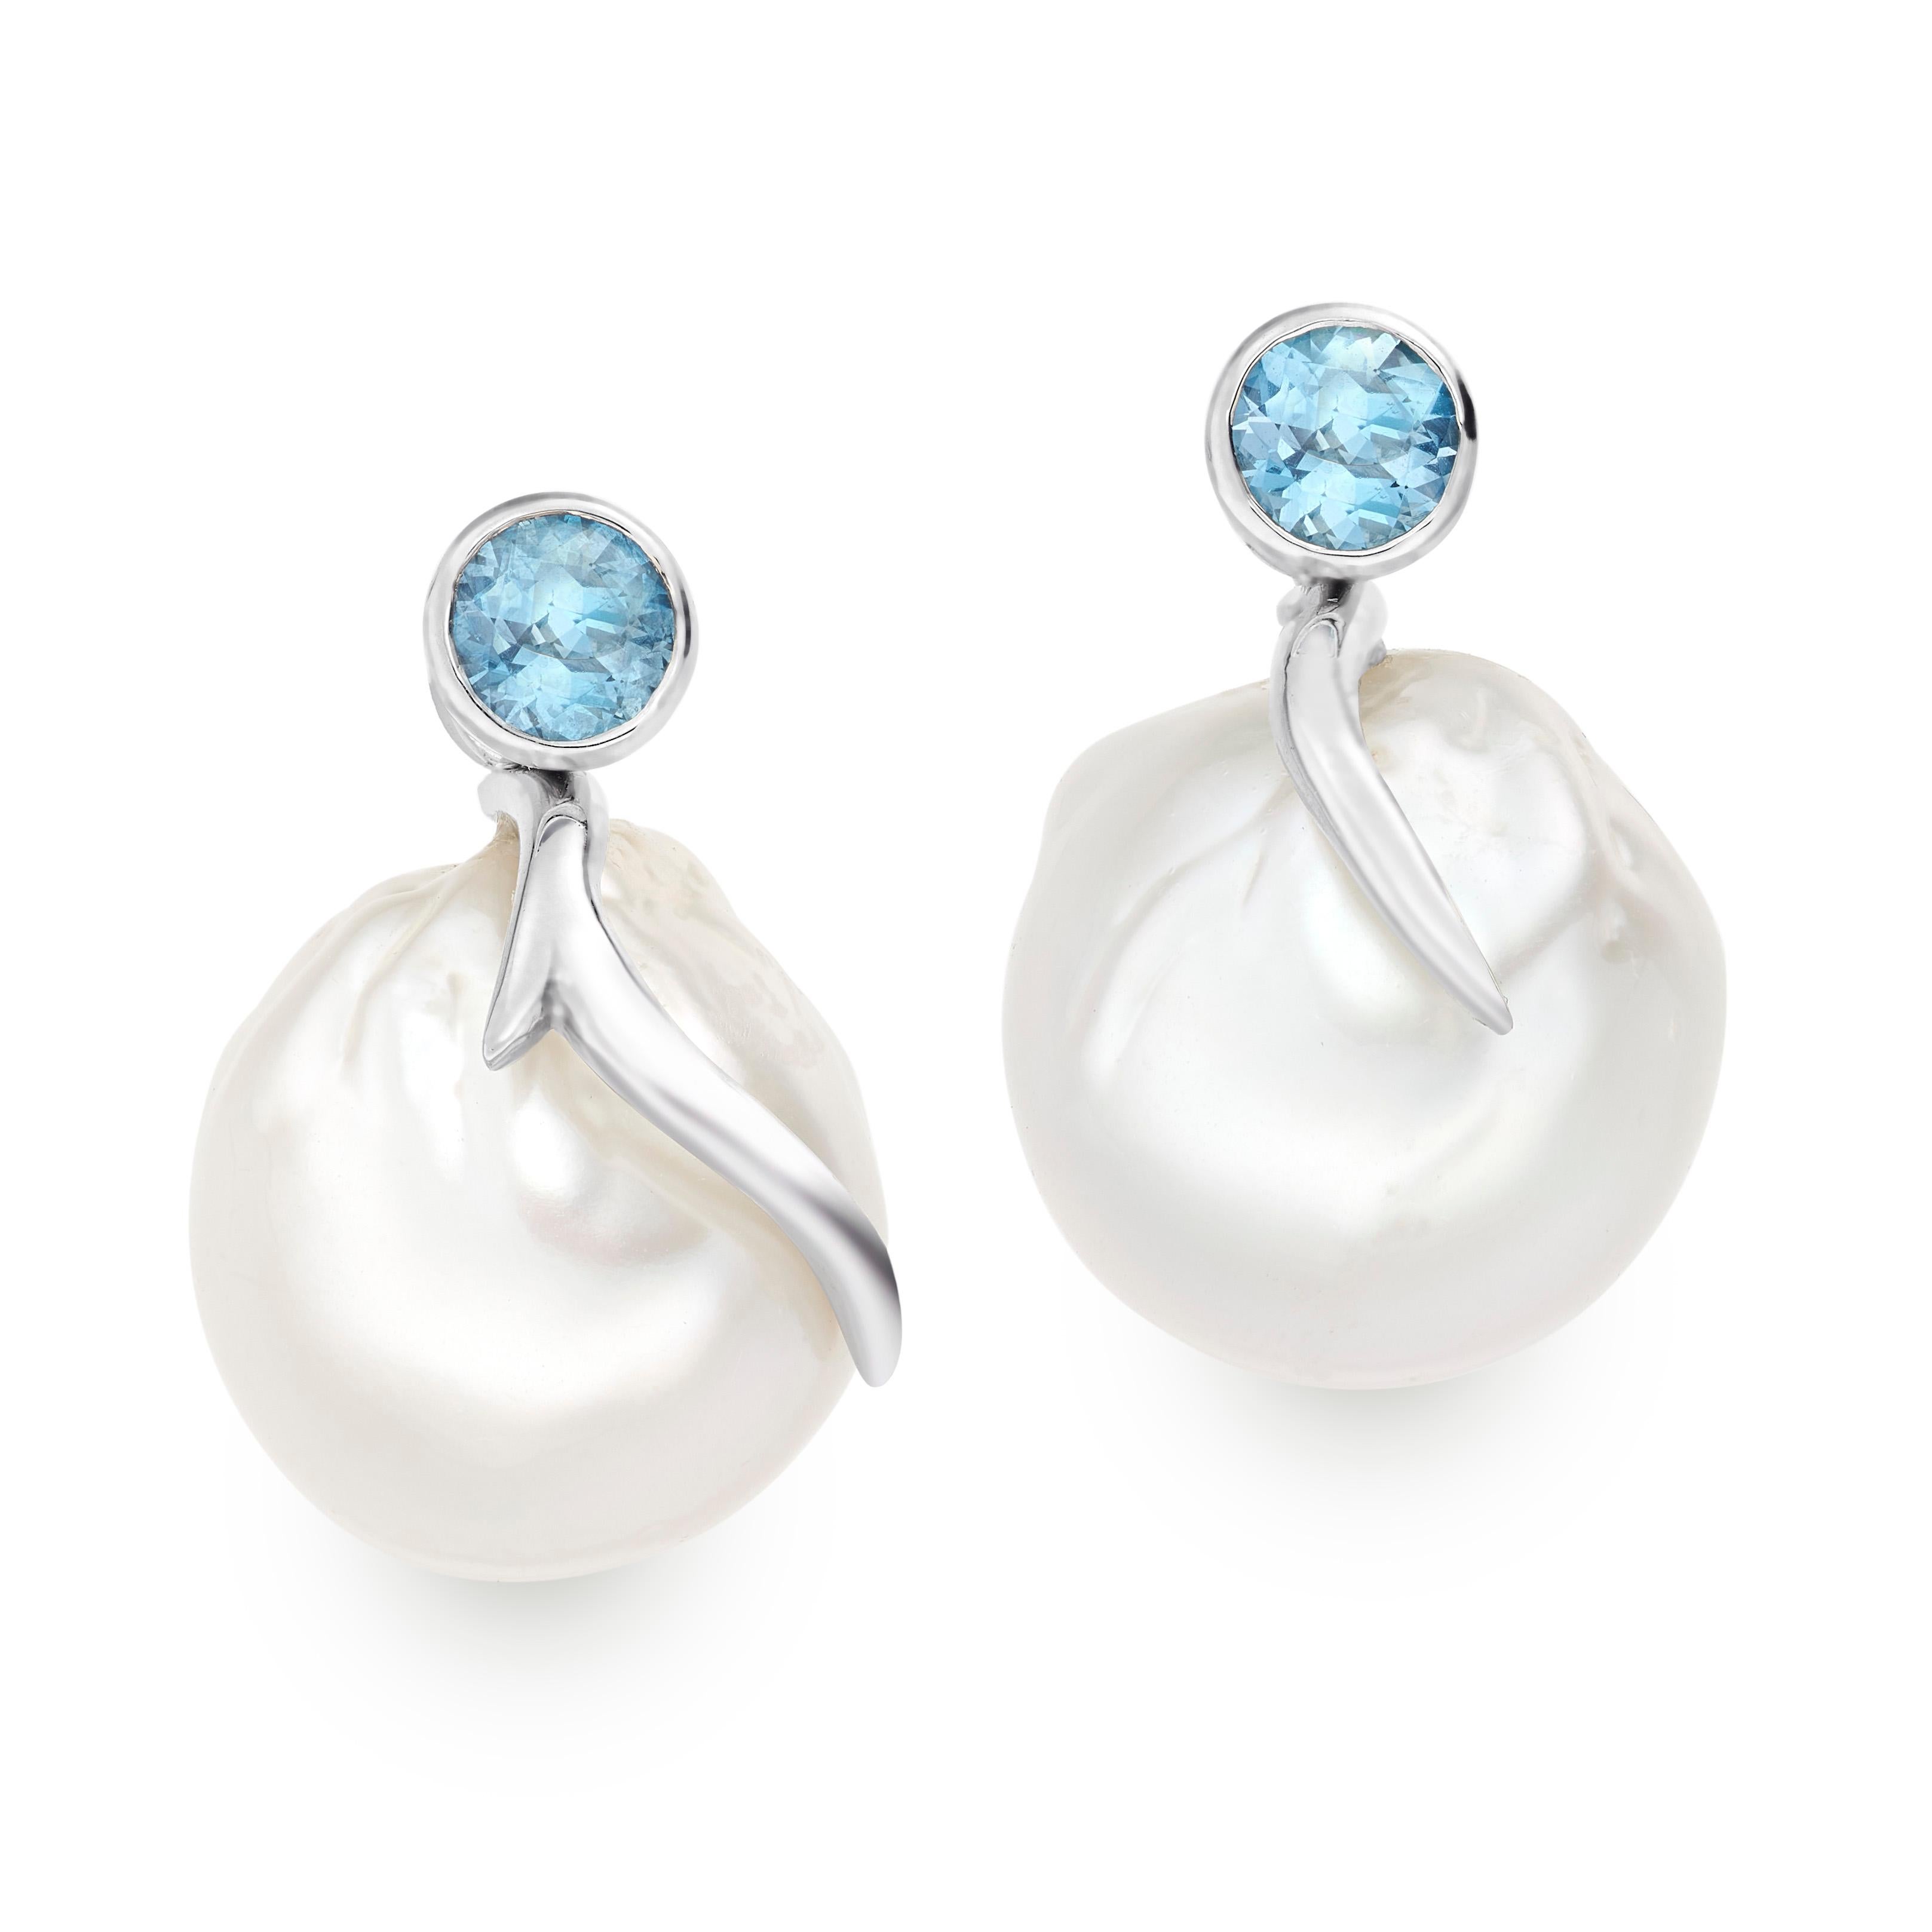 Brilliant Cut Lilly Hastedt Santa Maria Aquamarine and South Sea Pearl Earrings For Sale